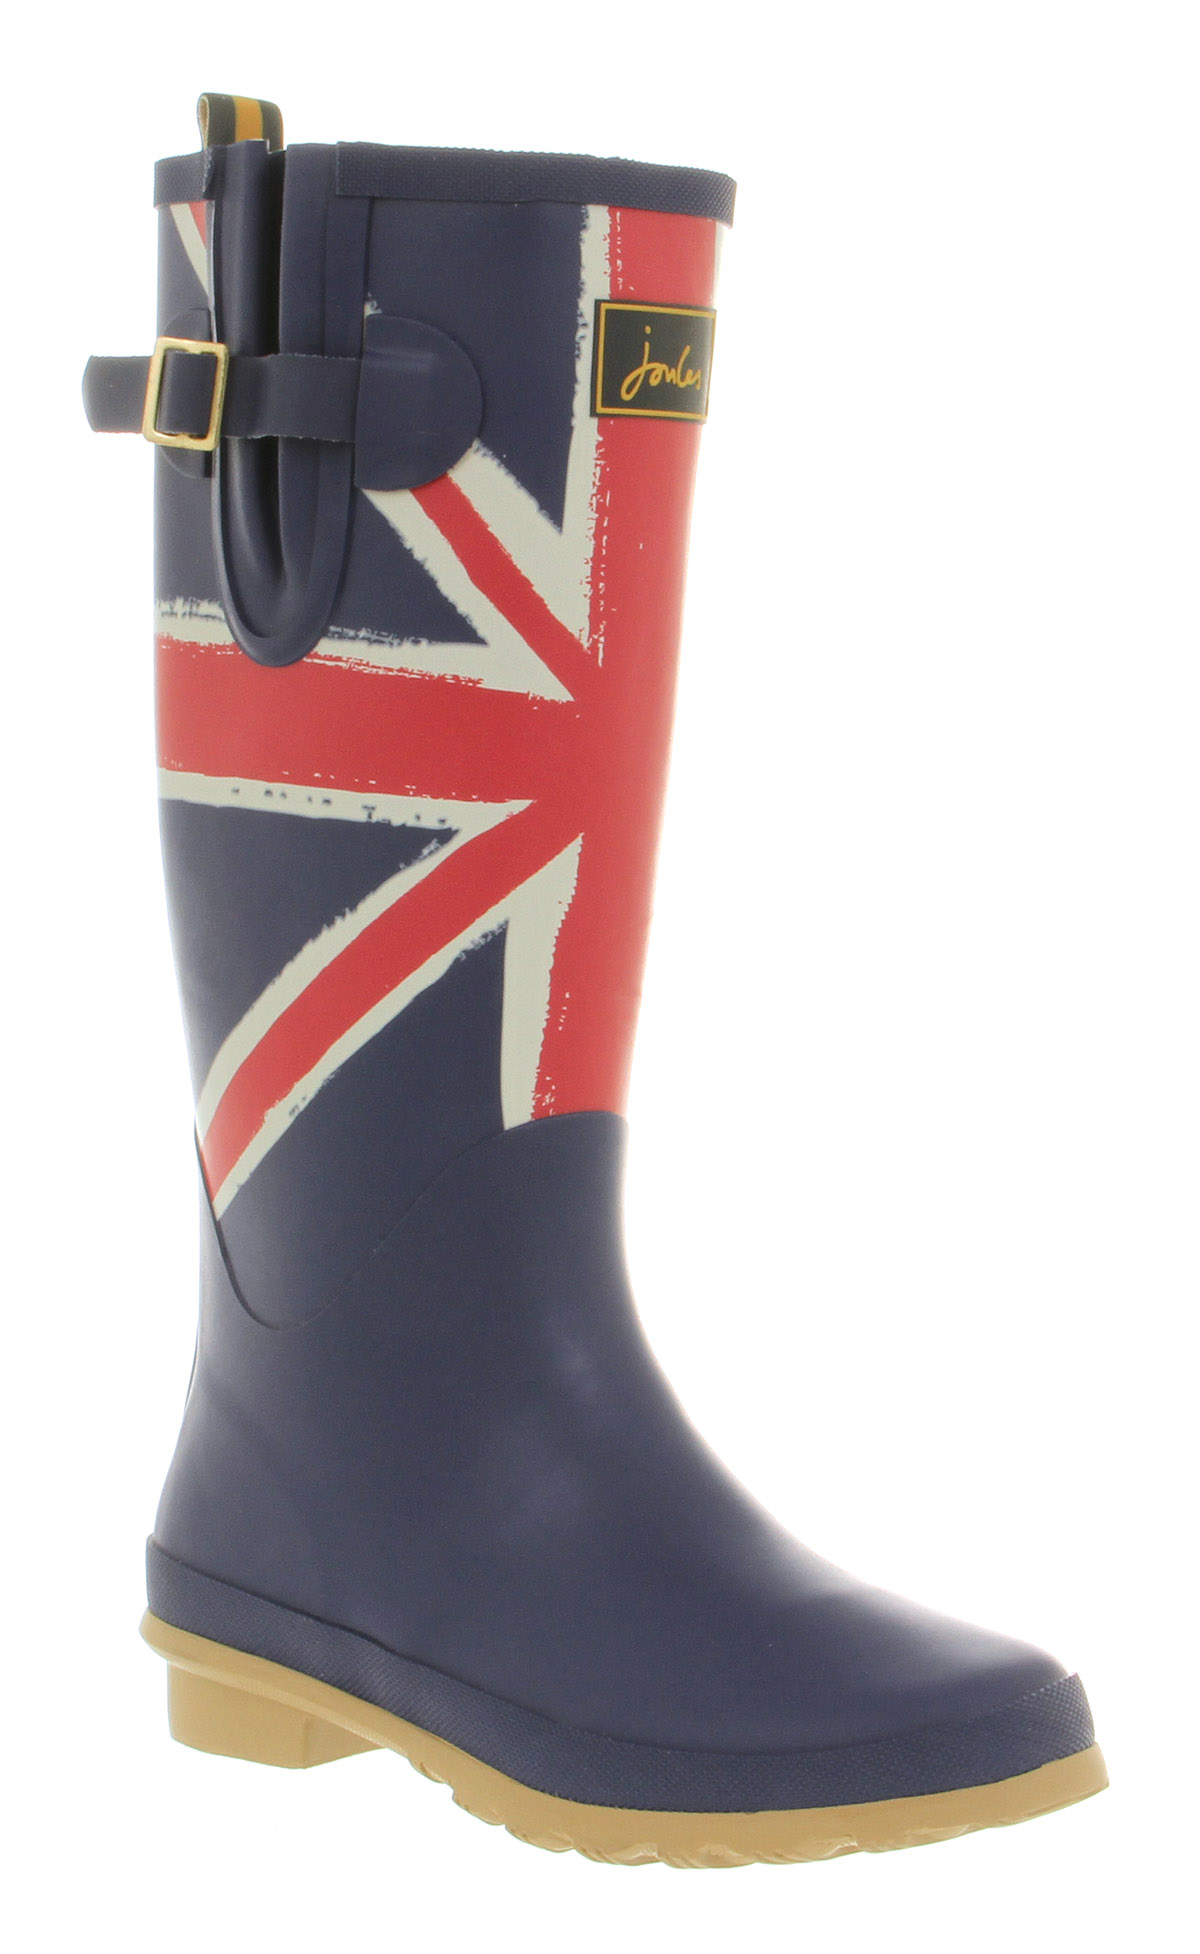 Lyst - Joules Jack Welly Union Jack in Blue